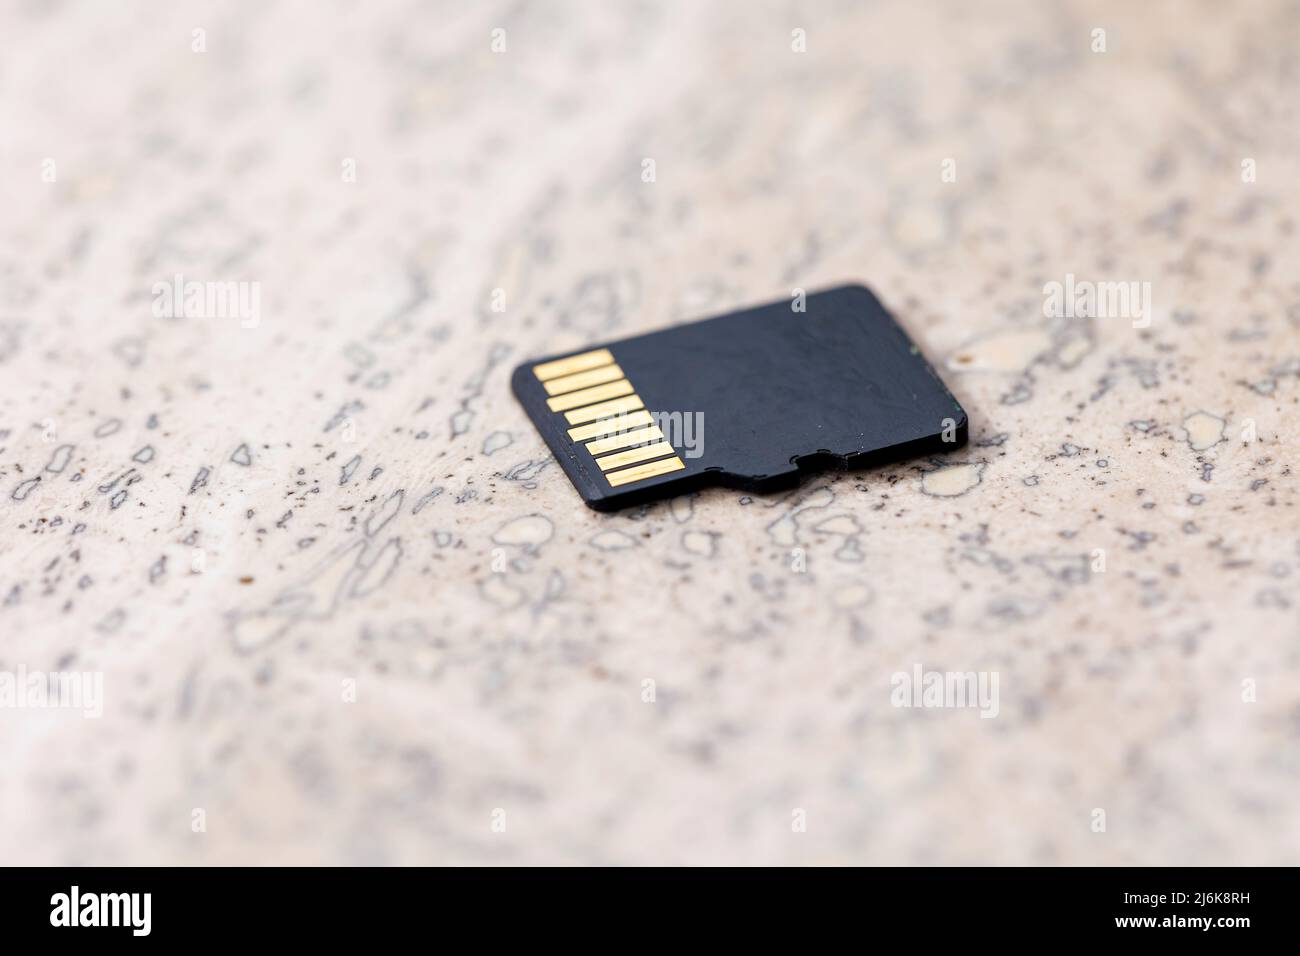 A close up portrait of the back of a black micro SD card, the connectors of the small piece of storage electronics hardware is visible. Stock Photo